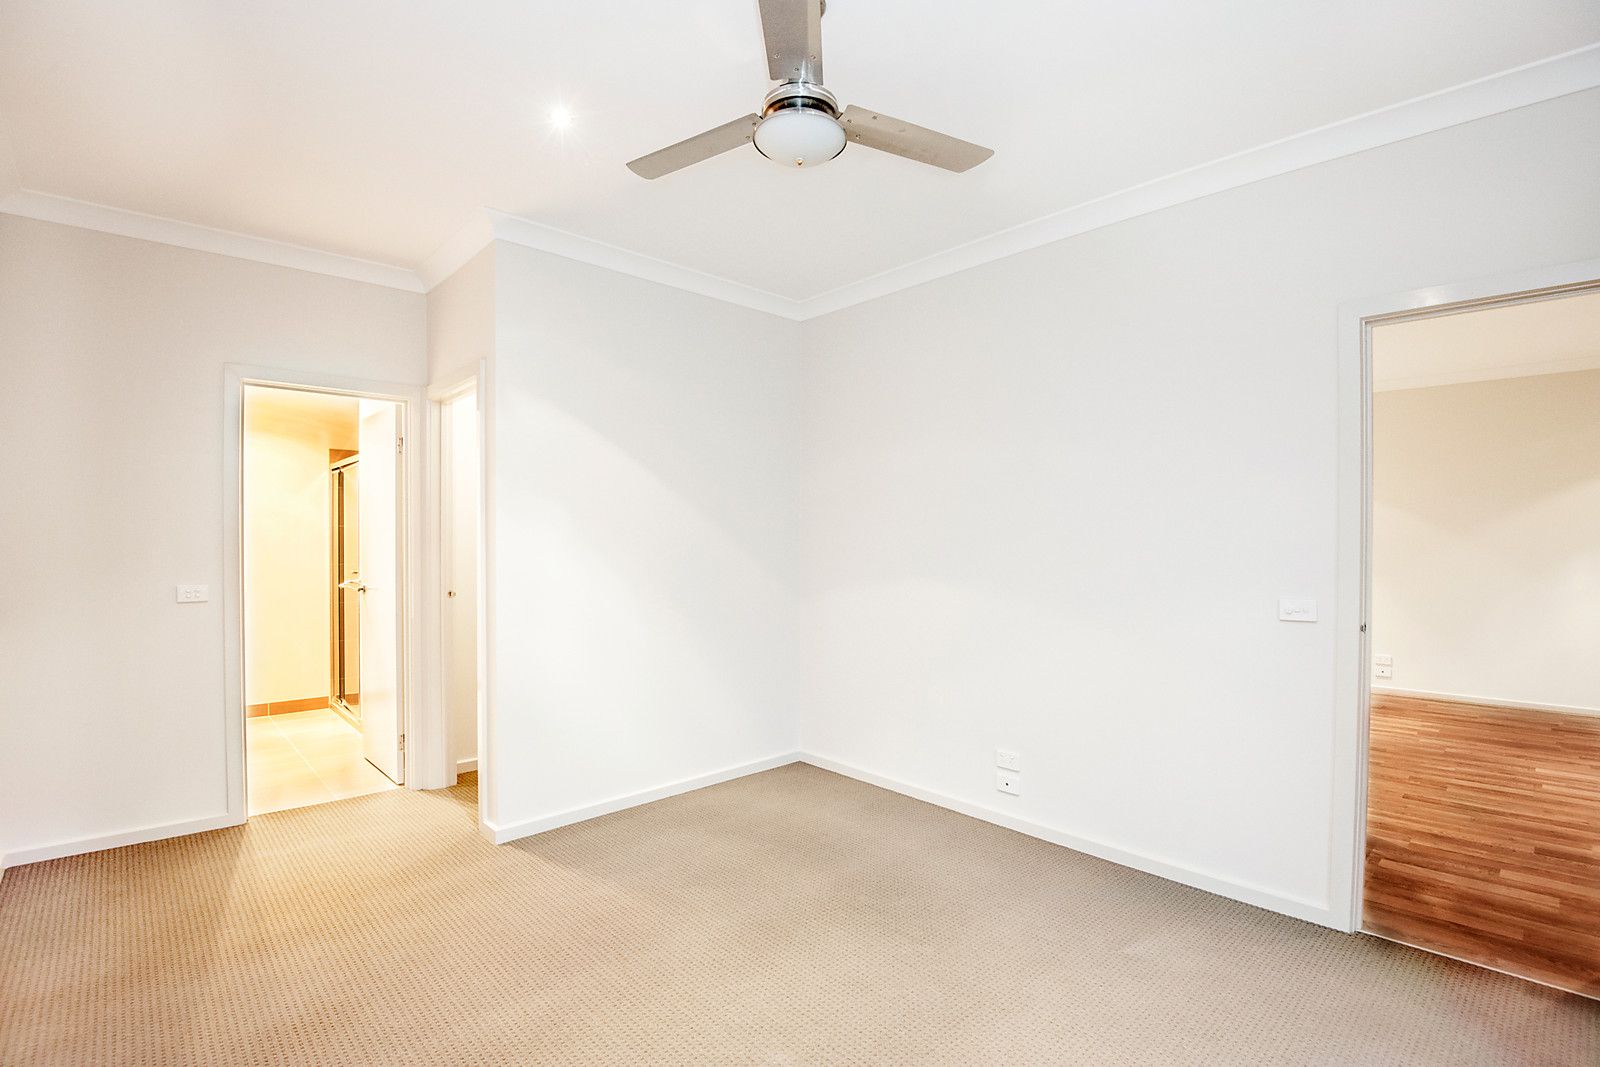 Lot 2 (Unit 4), 19 Brewster Street, Woodend VIC 3442, Image 2